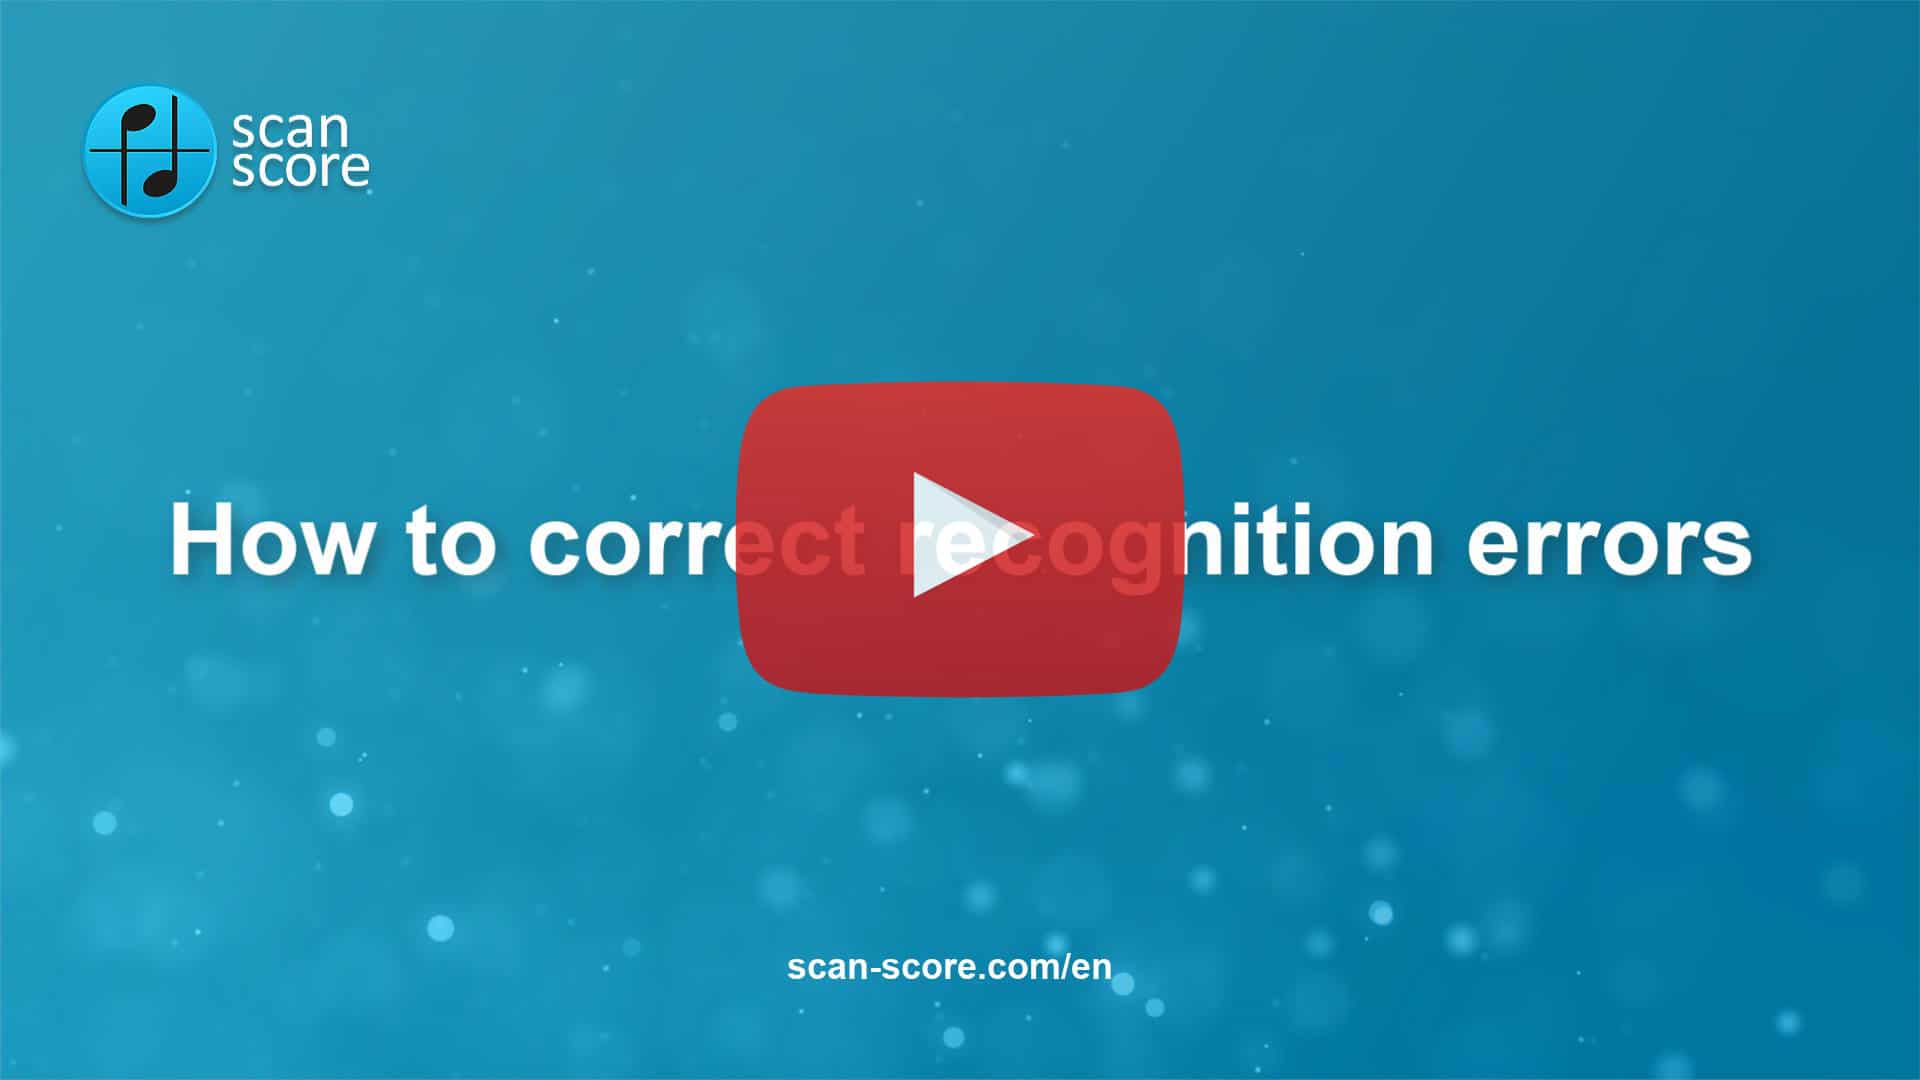 How to correct recognition errors